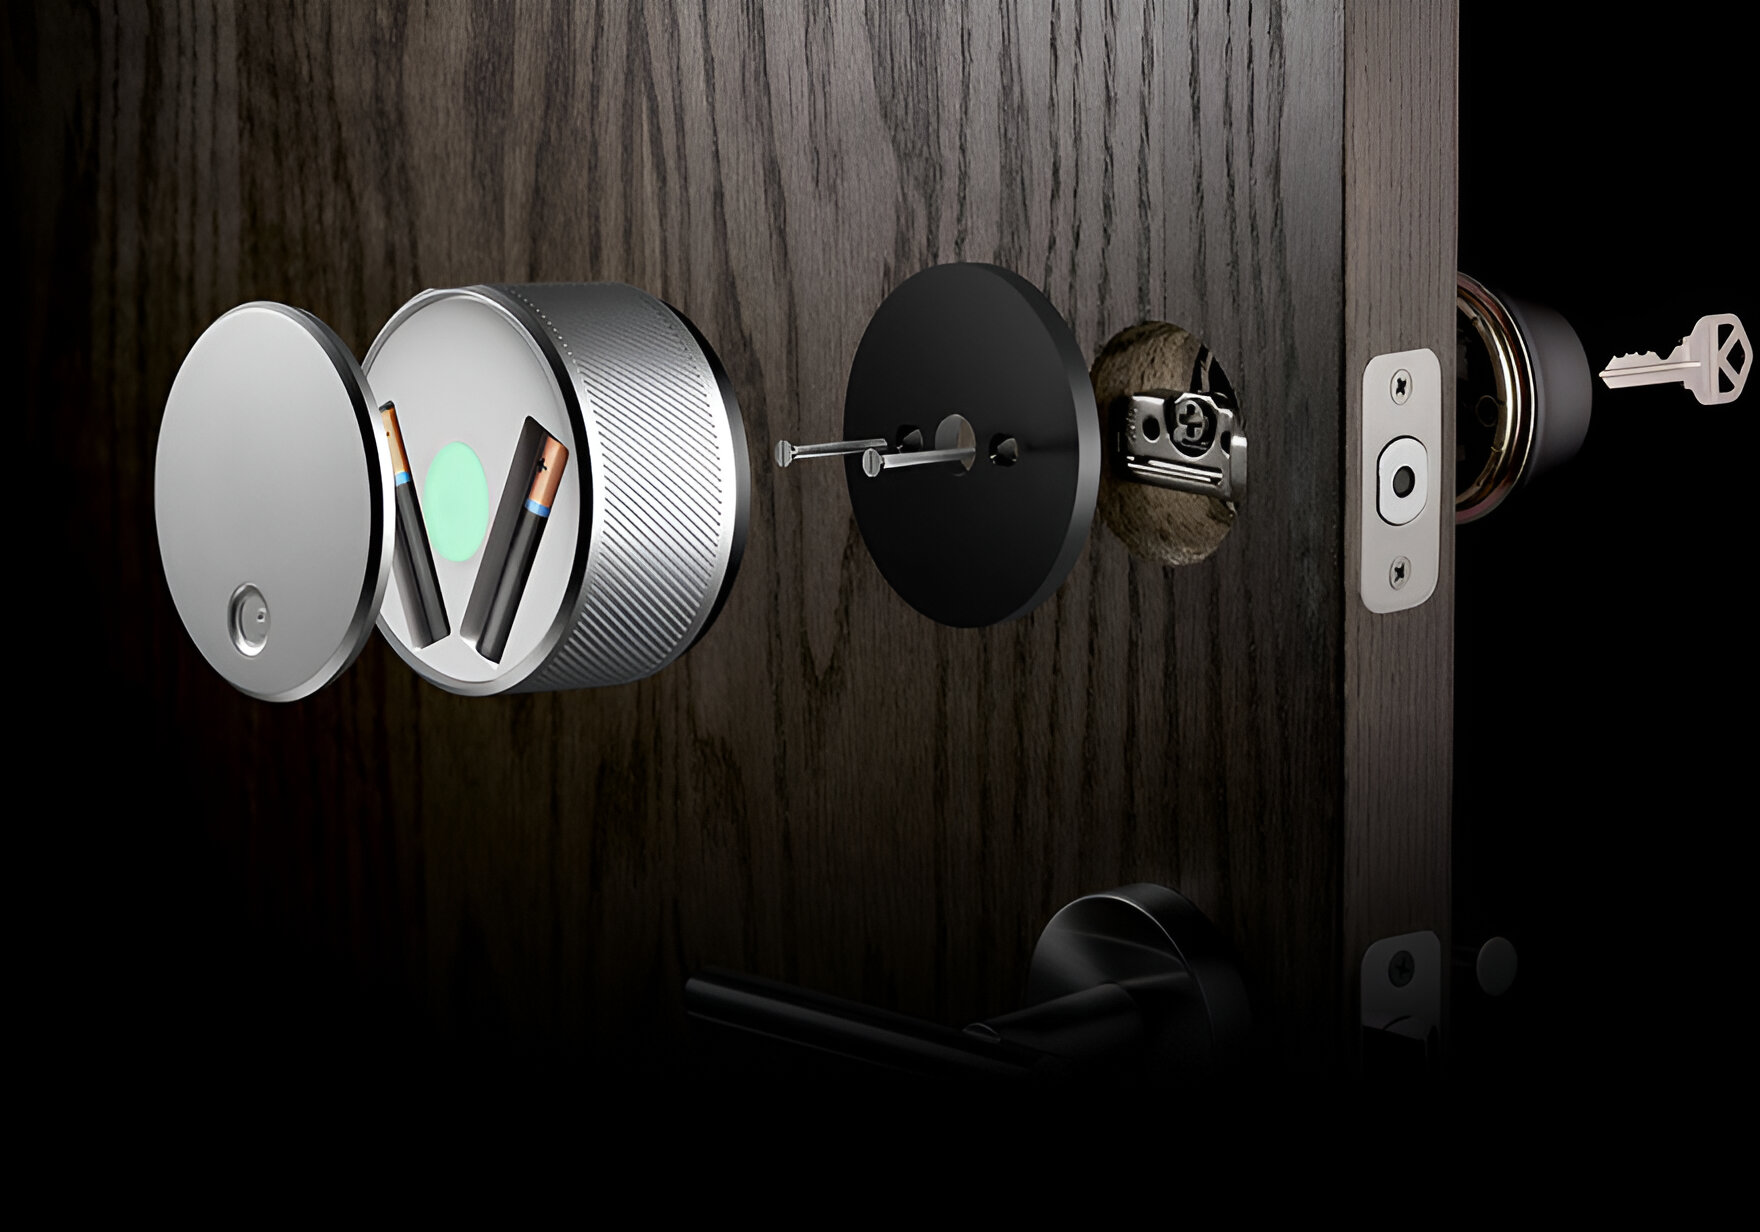 How To Use A Key With August Smart Door Lock